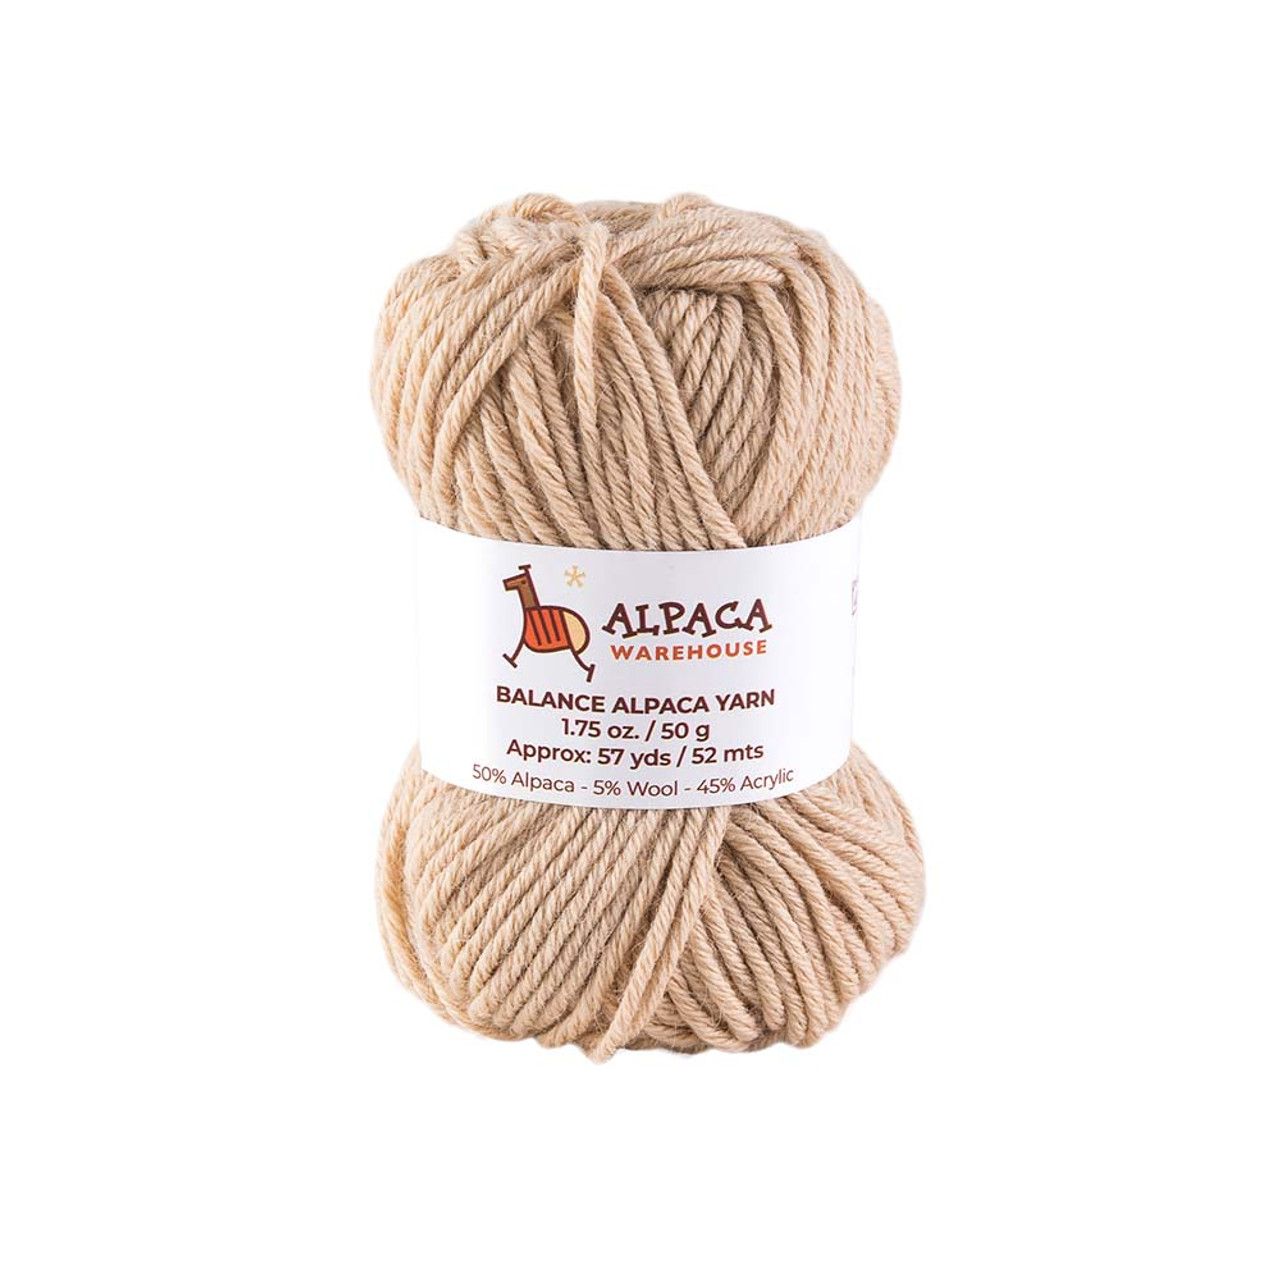 Blend Alpaca Yarn Wool Set of 3 Skeins Fingering Worsted Weight - Heavenly  Soft and Perfect for Knitting and Crocheting (Black, Bulky)